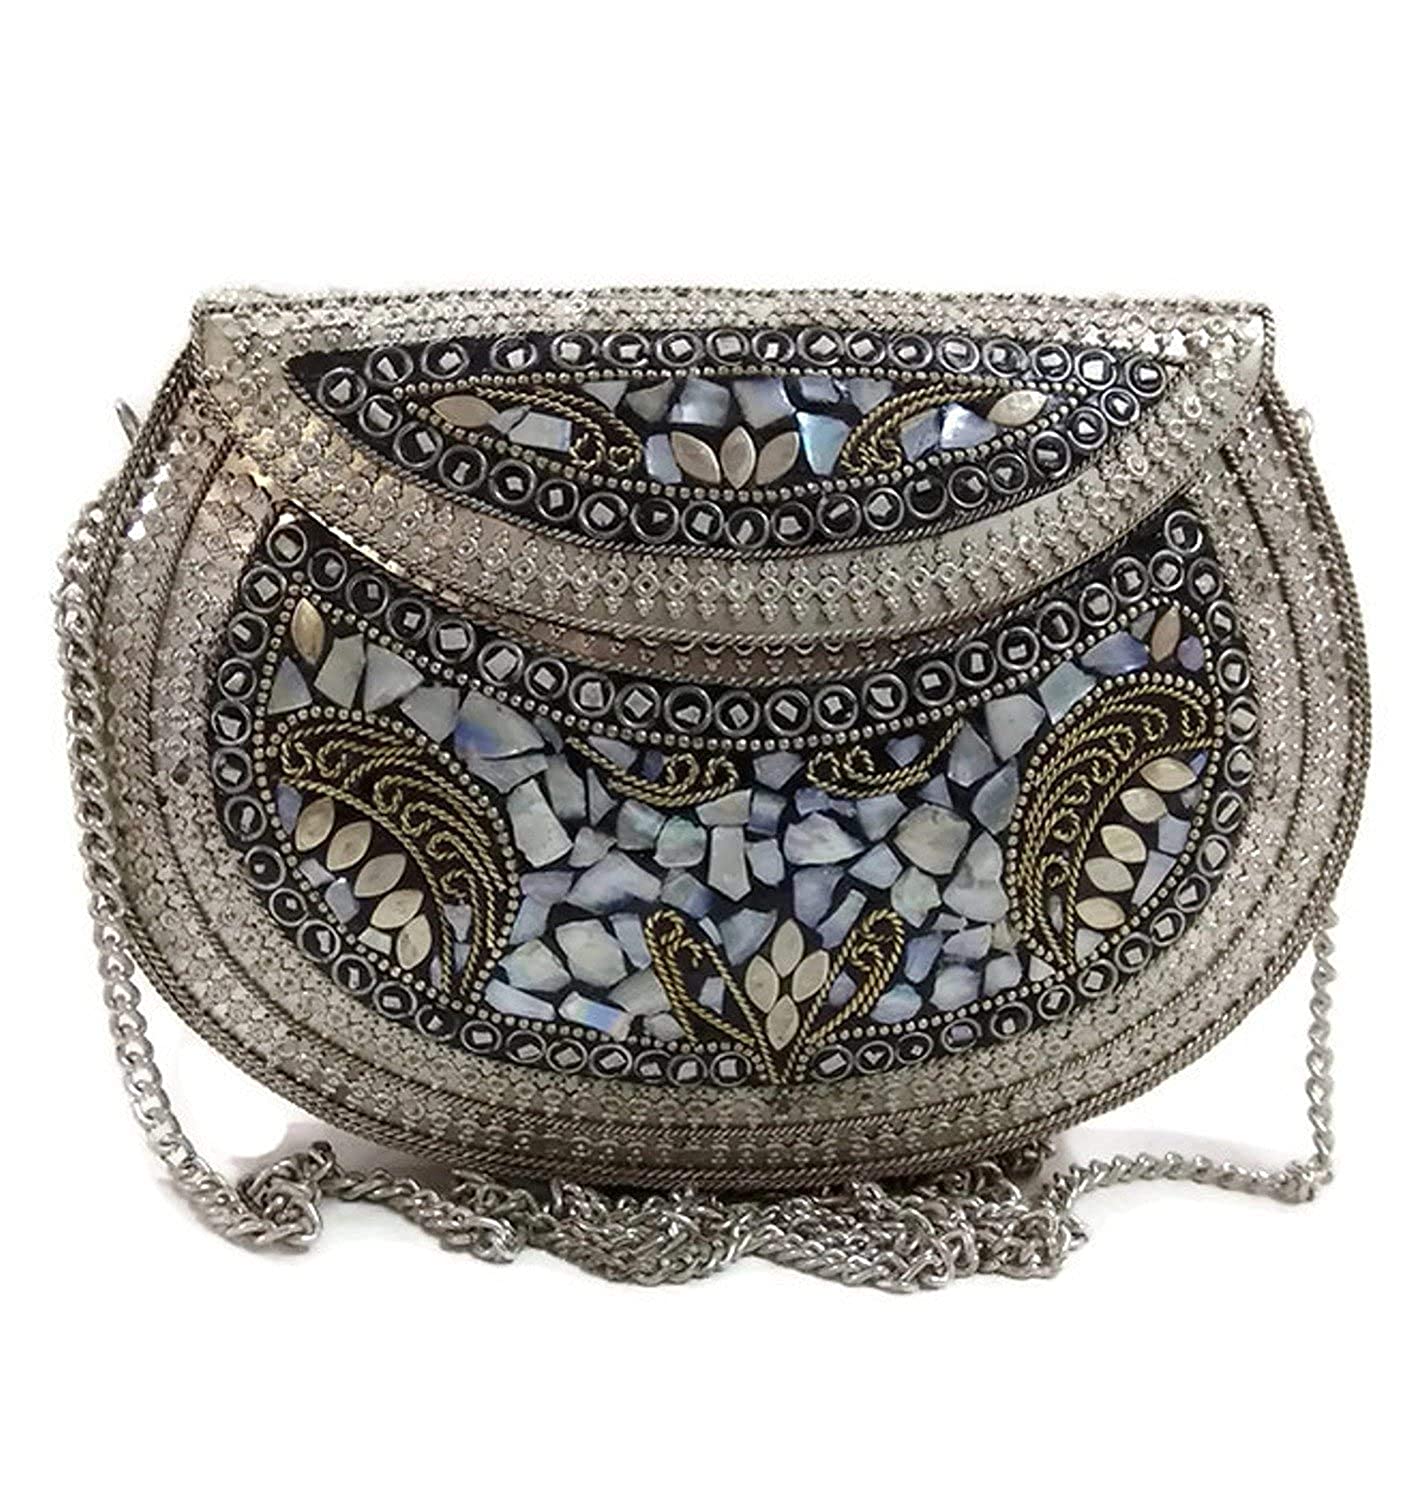 Buy German Silver Metal Clutch With Handle, Indian Handmade Silver Party  Sling Bag, Proposal Gift for Her, Ethnic Handmade Vintage Style Purse  Online in India - Etsy